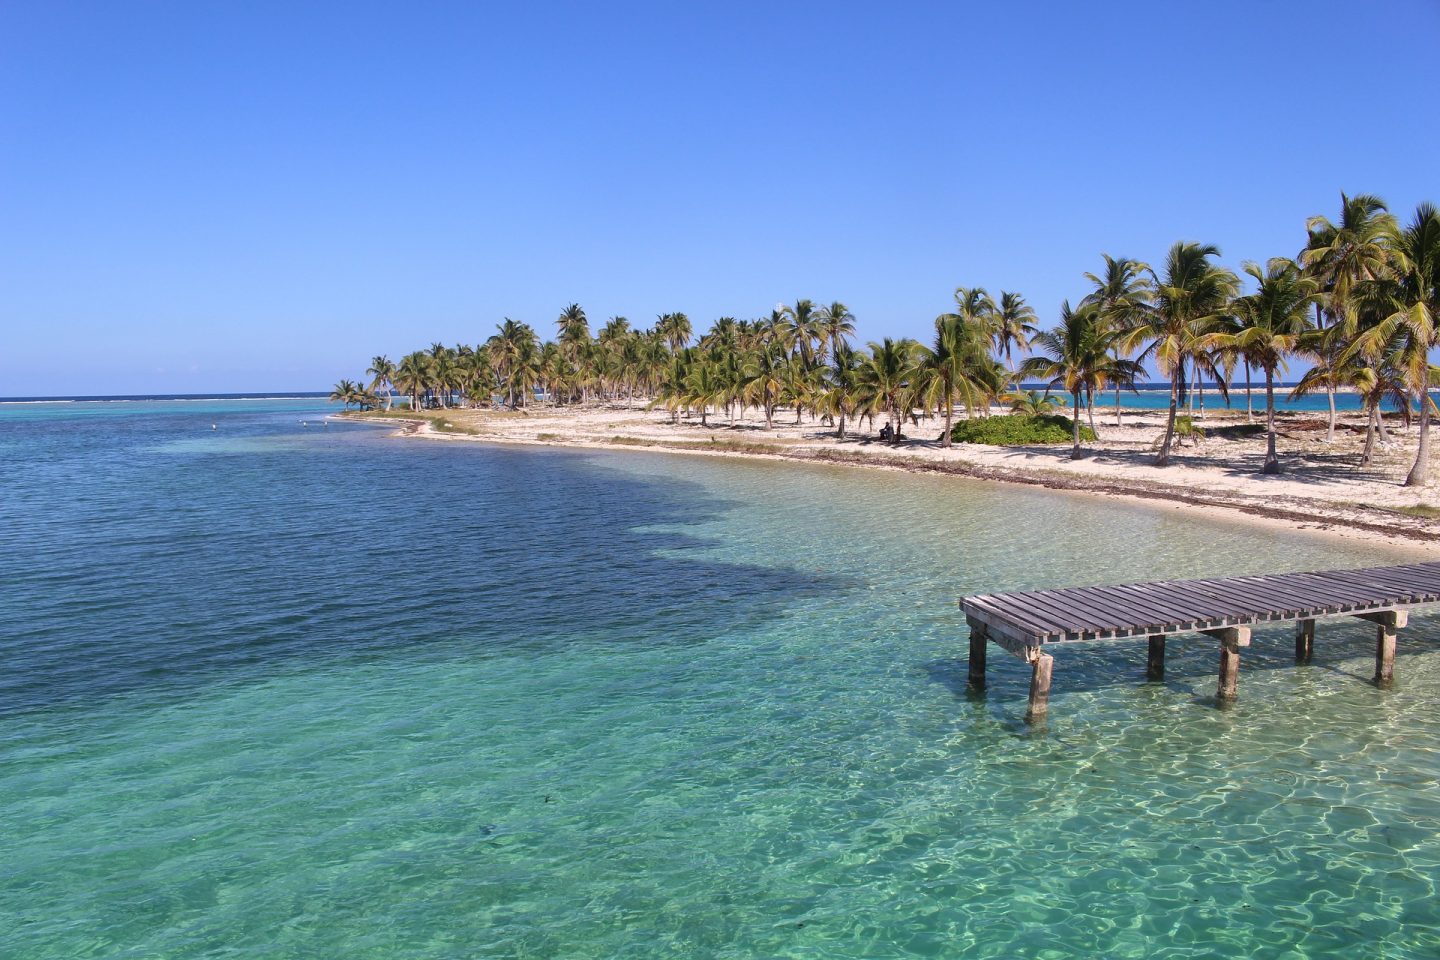 Things to do in Belize